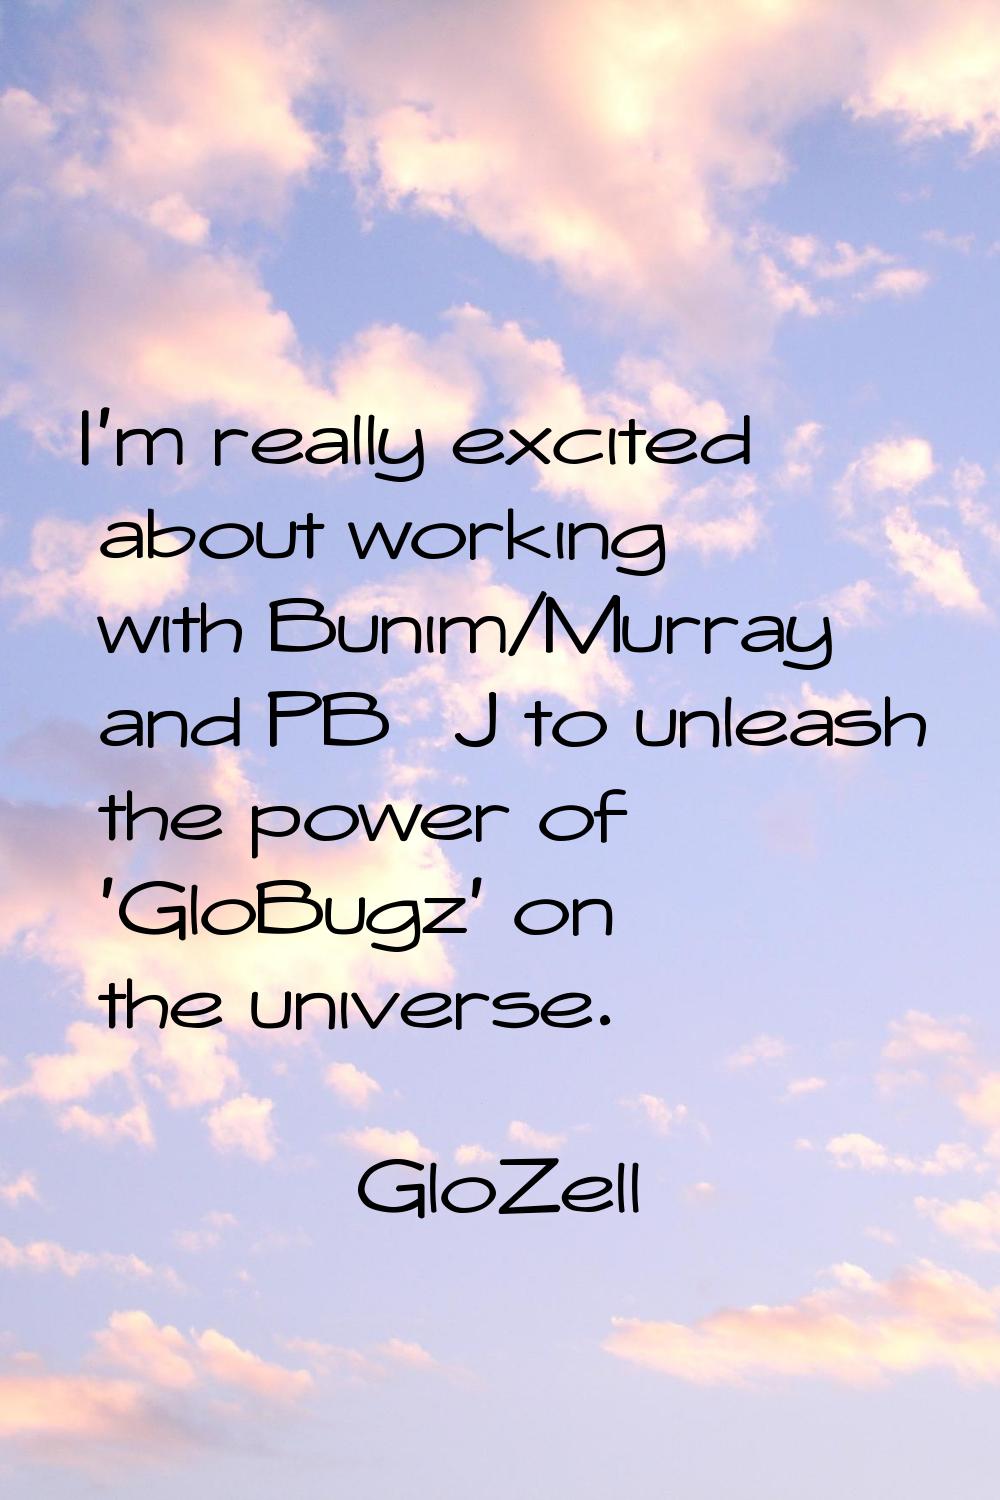 I'm really excited about working with Bunim/Murray and PB&J to unleash the power of 'GloBugz' on th